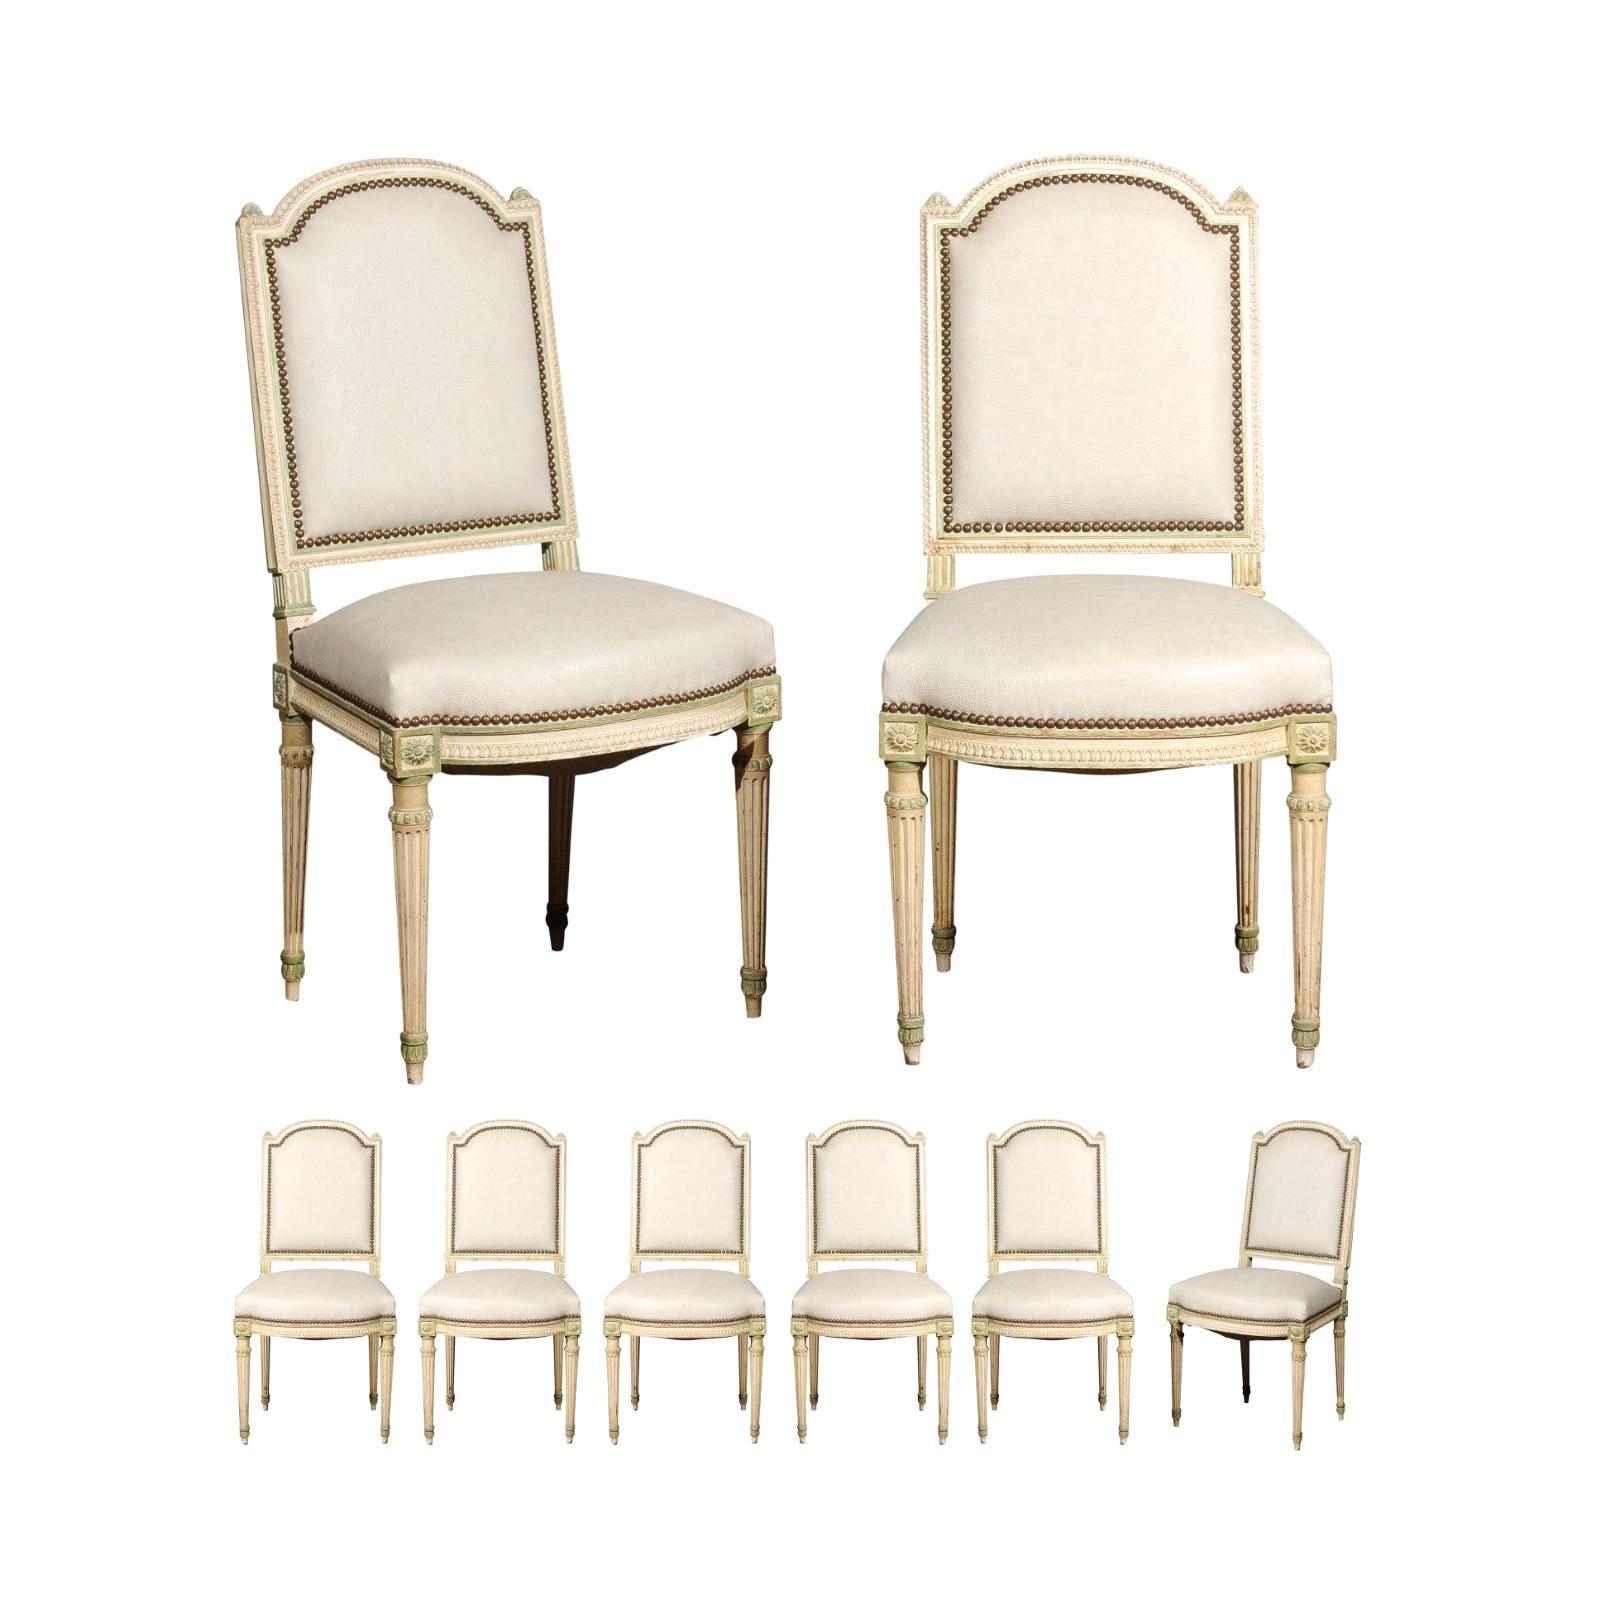 Set of Eight French Louis XVI Style Painted Dining Chairs with New Upholstery